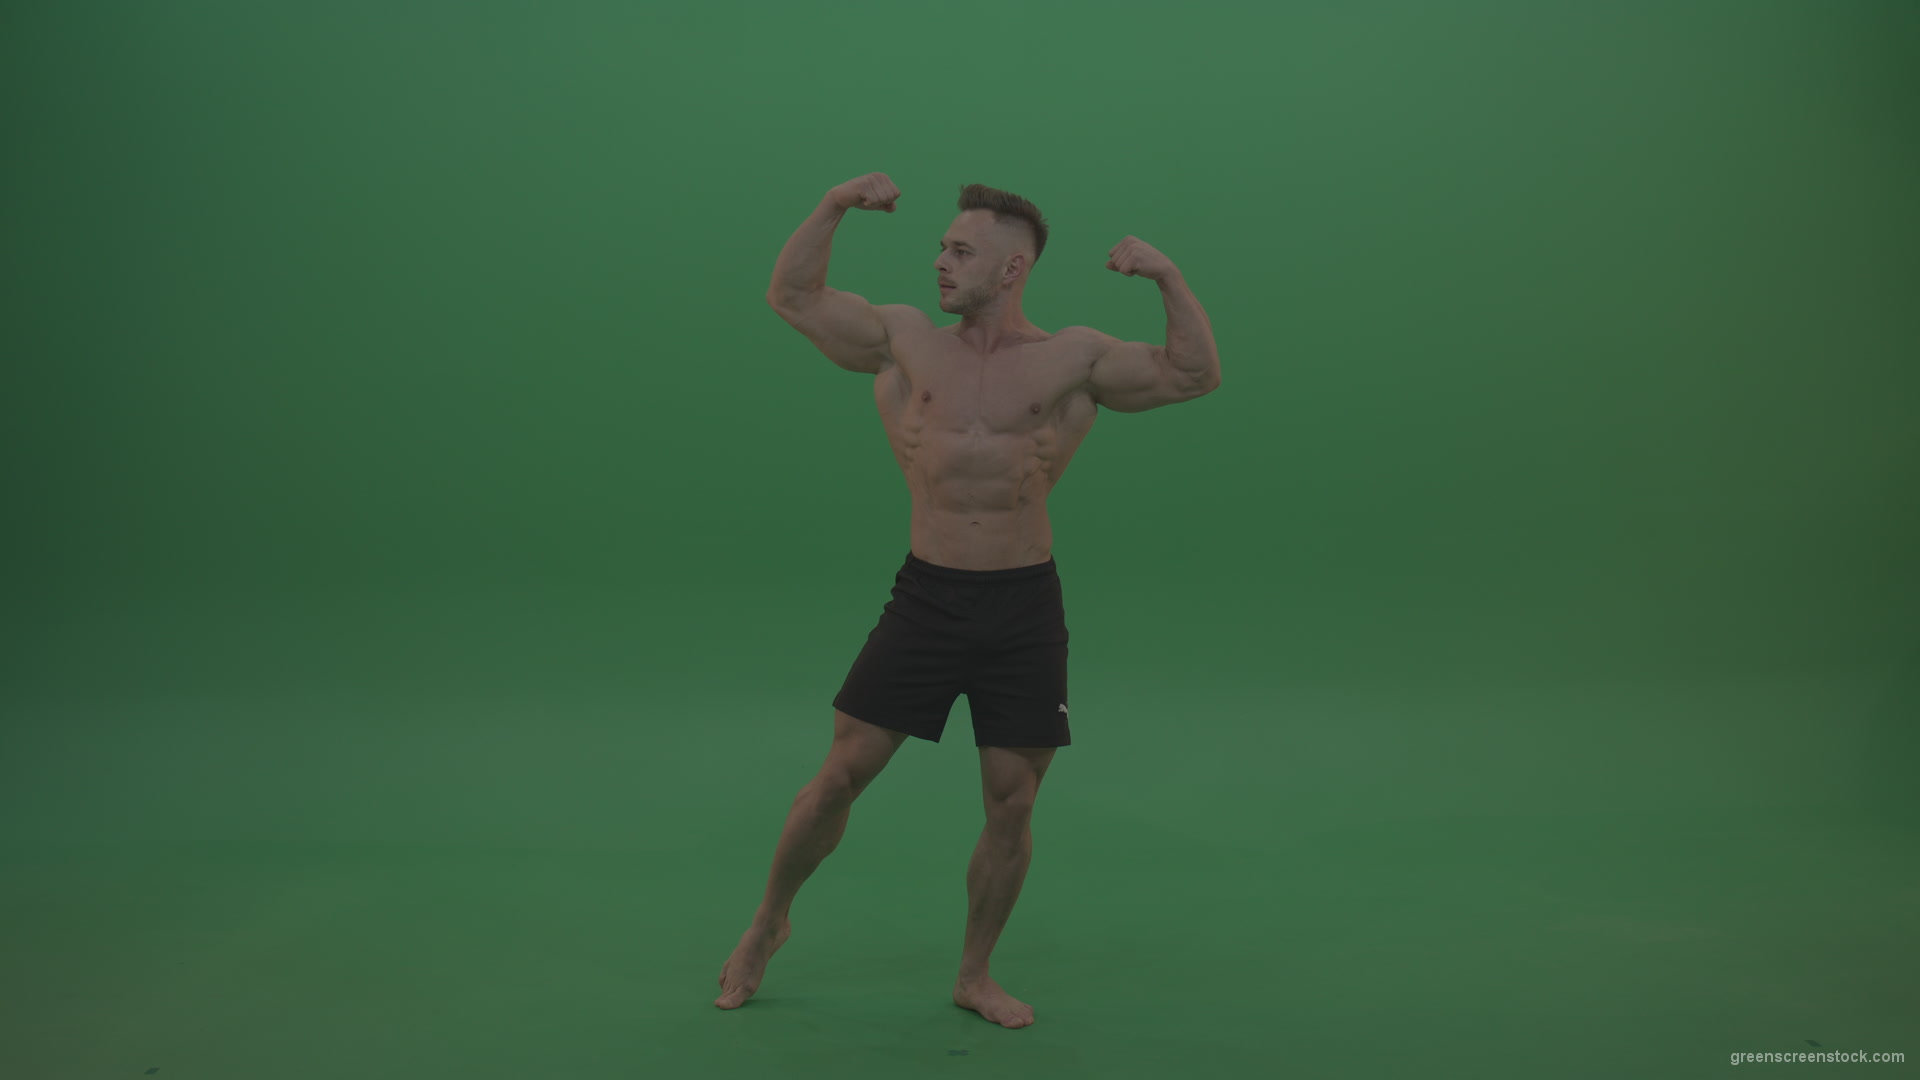 Young_Blonde_Bodybuilder_Demnstrating_Great_Double_Biceps_And_Front_Lateral_Spread_Posing_Technique_Green_Screen_Wall_Background_004 Green Screen Stock